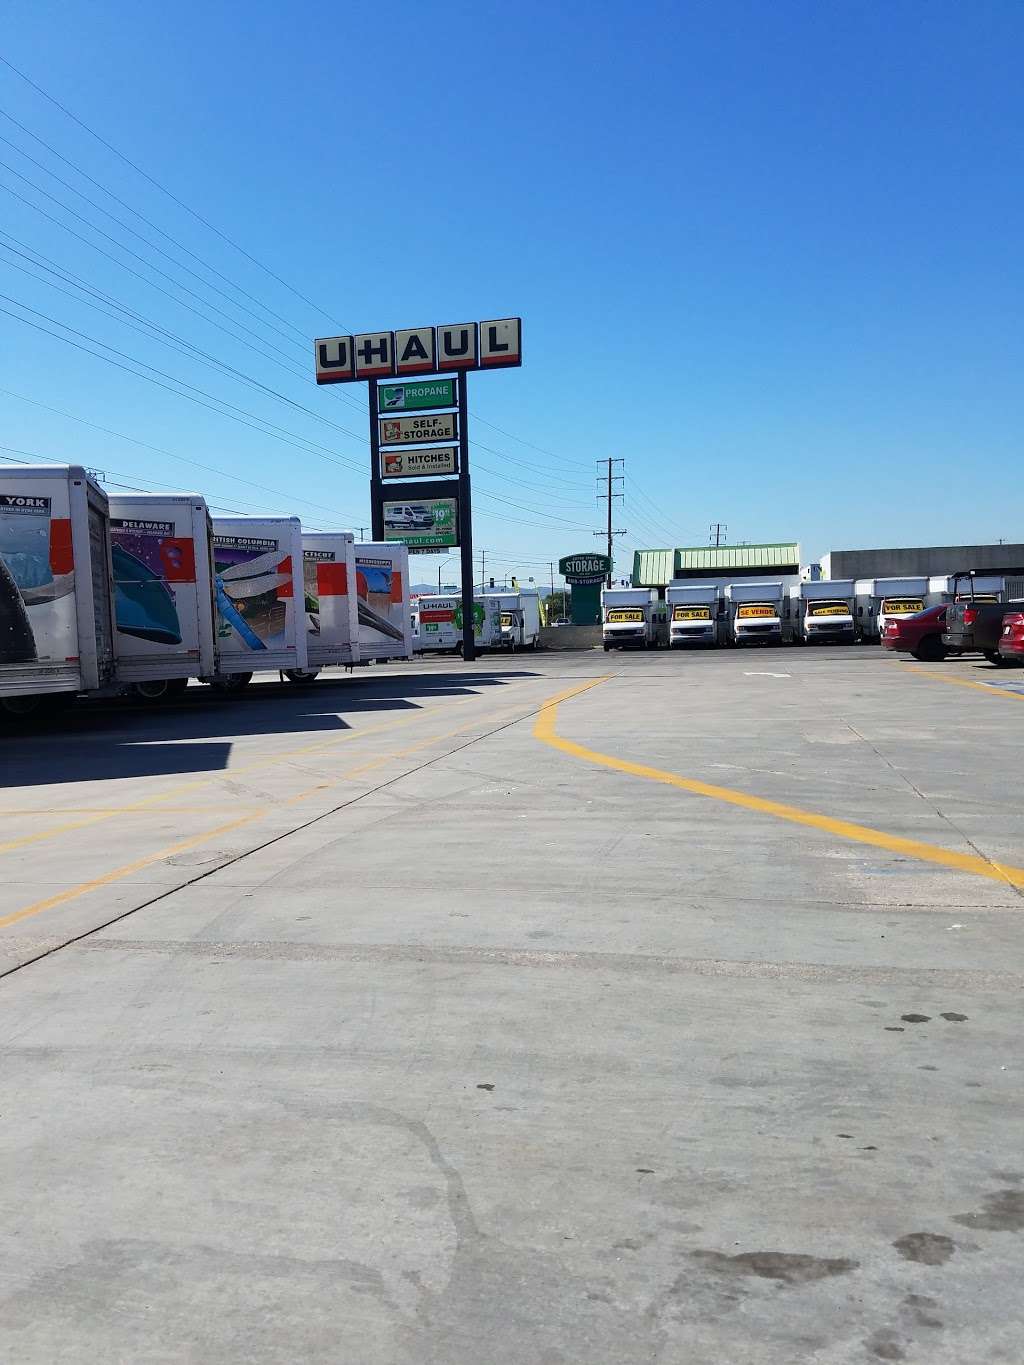 U-Haul Moving & Storage at Valley Blvd | 17959 Valley Blvd, City of Industry, CA 91744 | Phone: (626) 935-0226